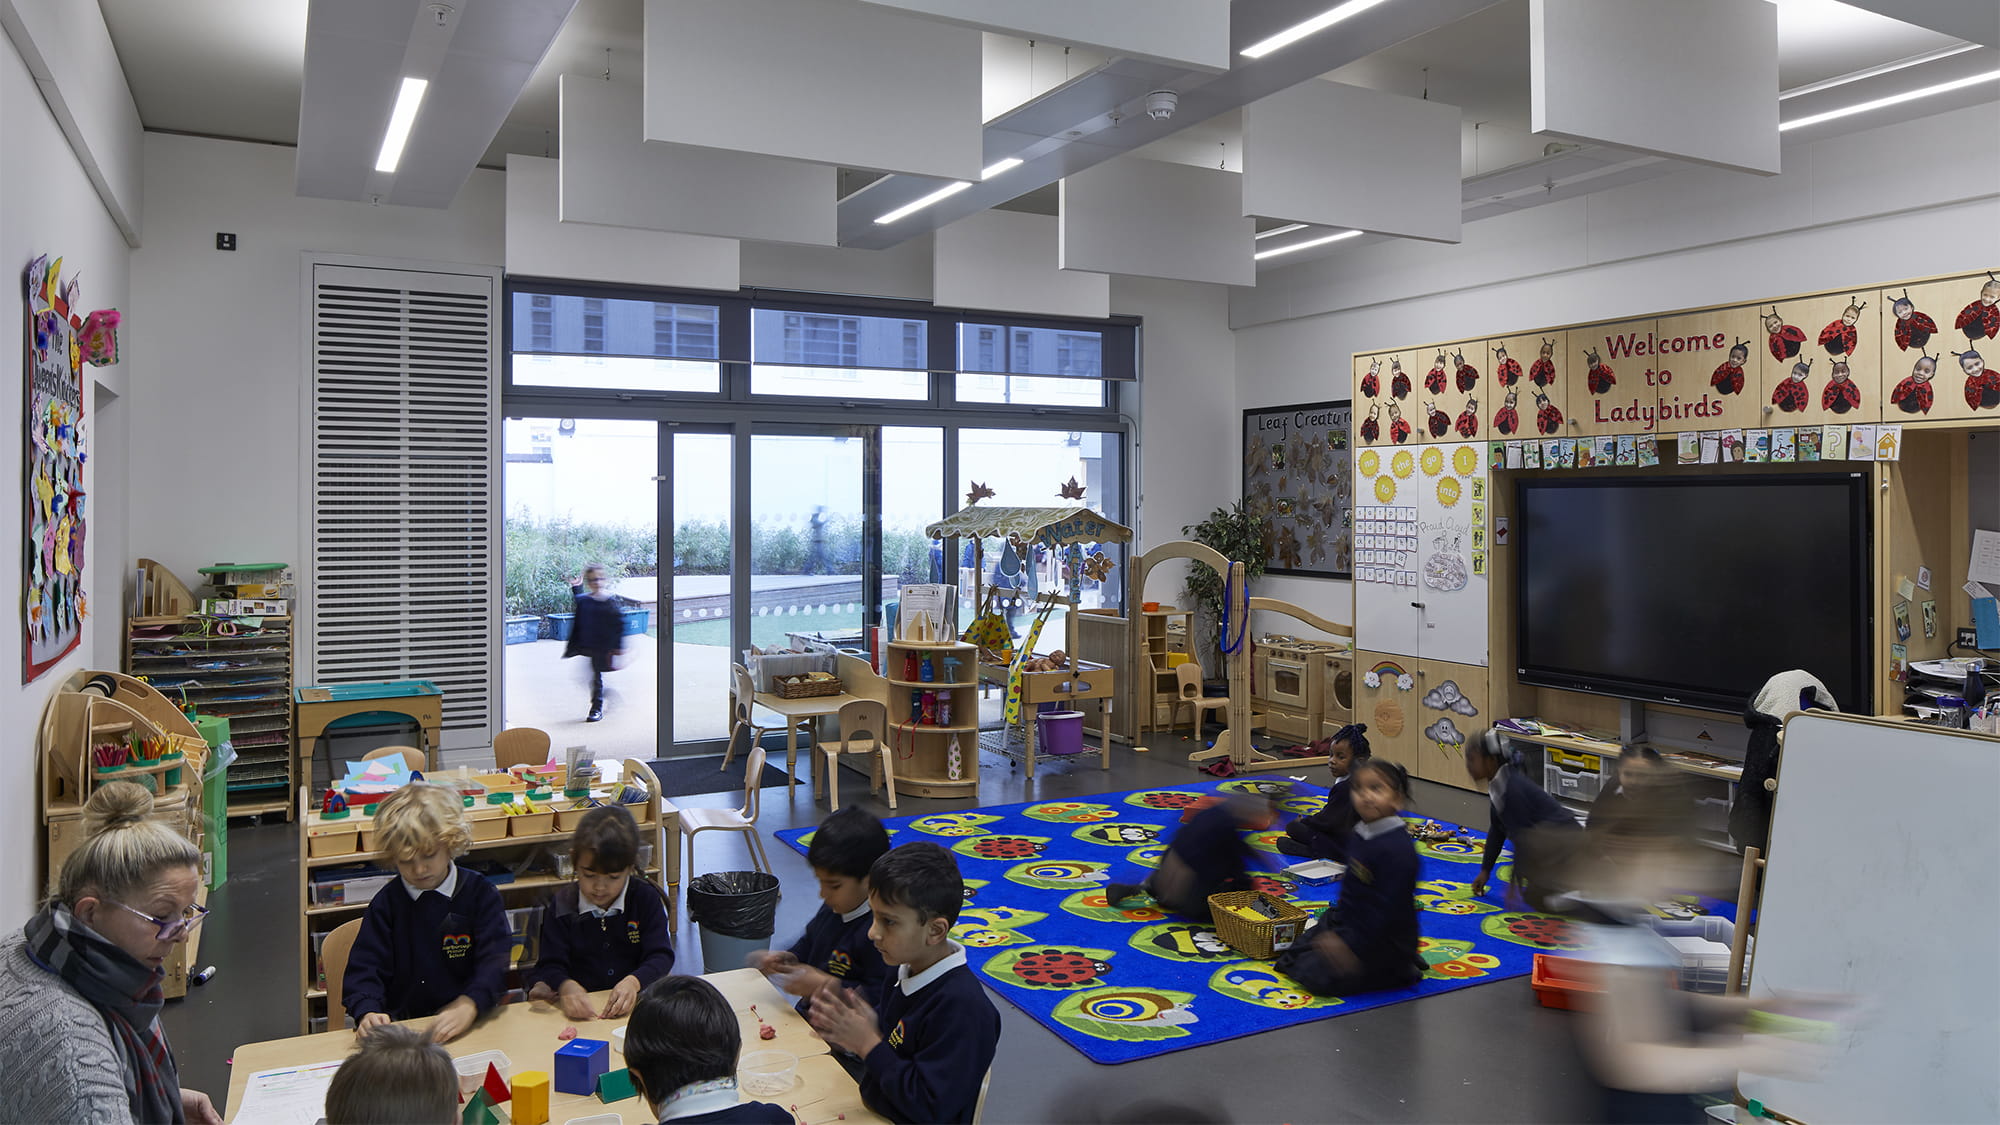 The expansion has enabled the school to grow to full, two-form entry with a special needs unit. 